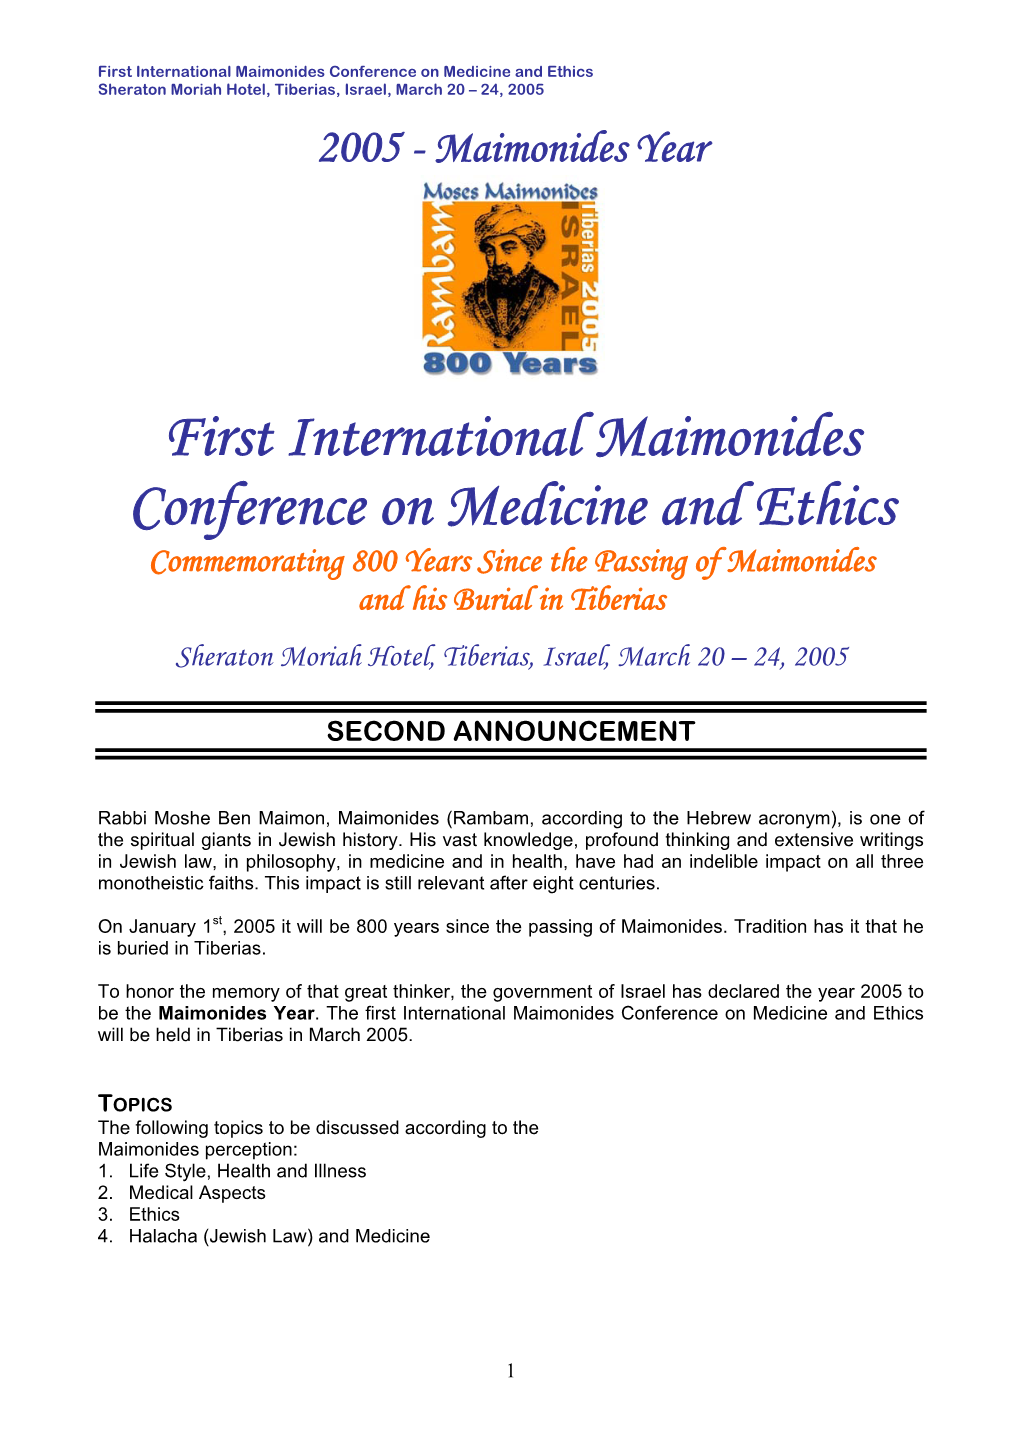 The International Maimonides Conference on Medicine and Ethics